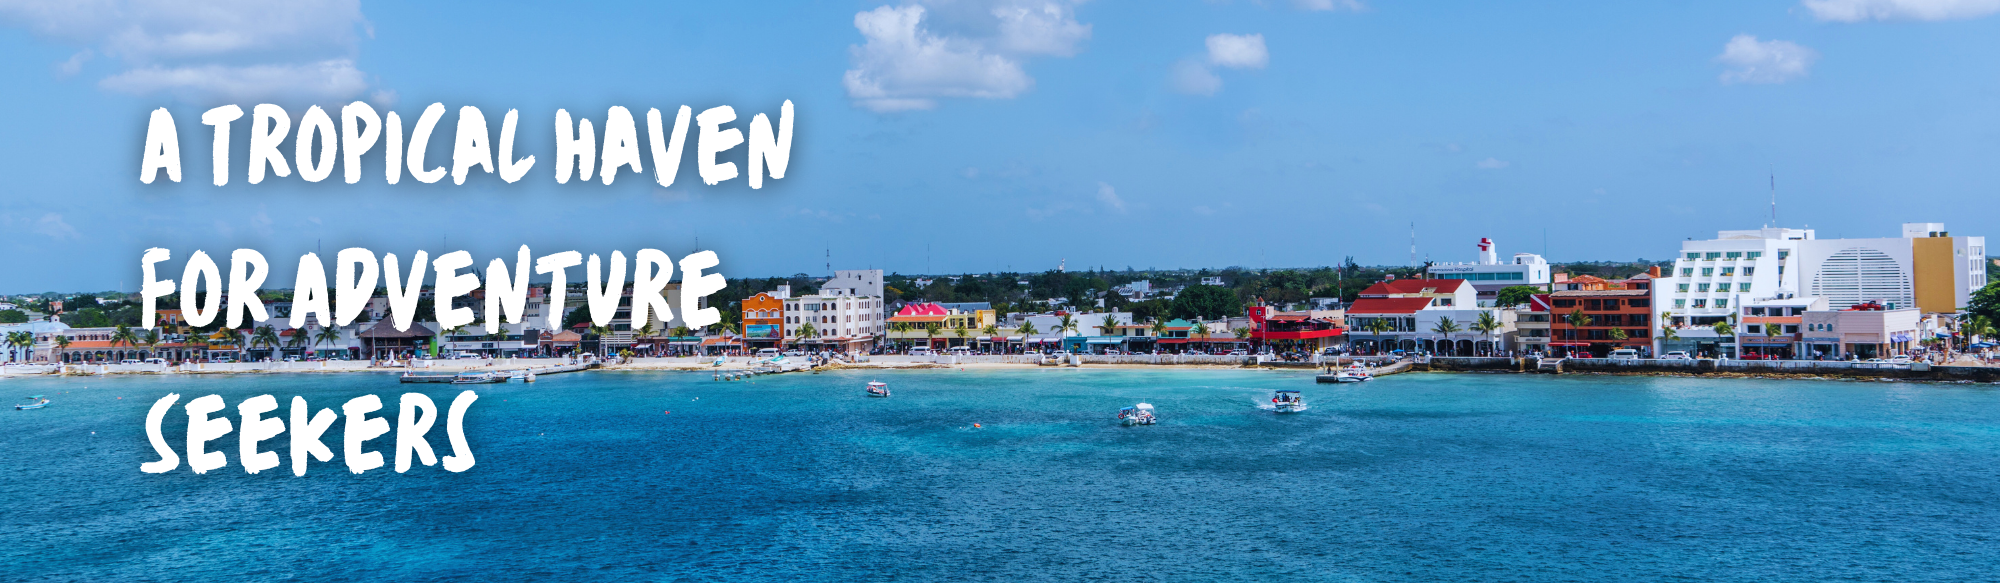 cozumel - a tropical haven for adventure seekers